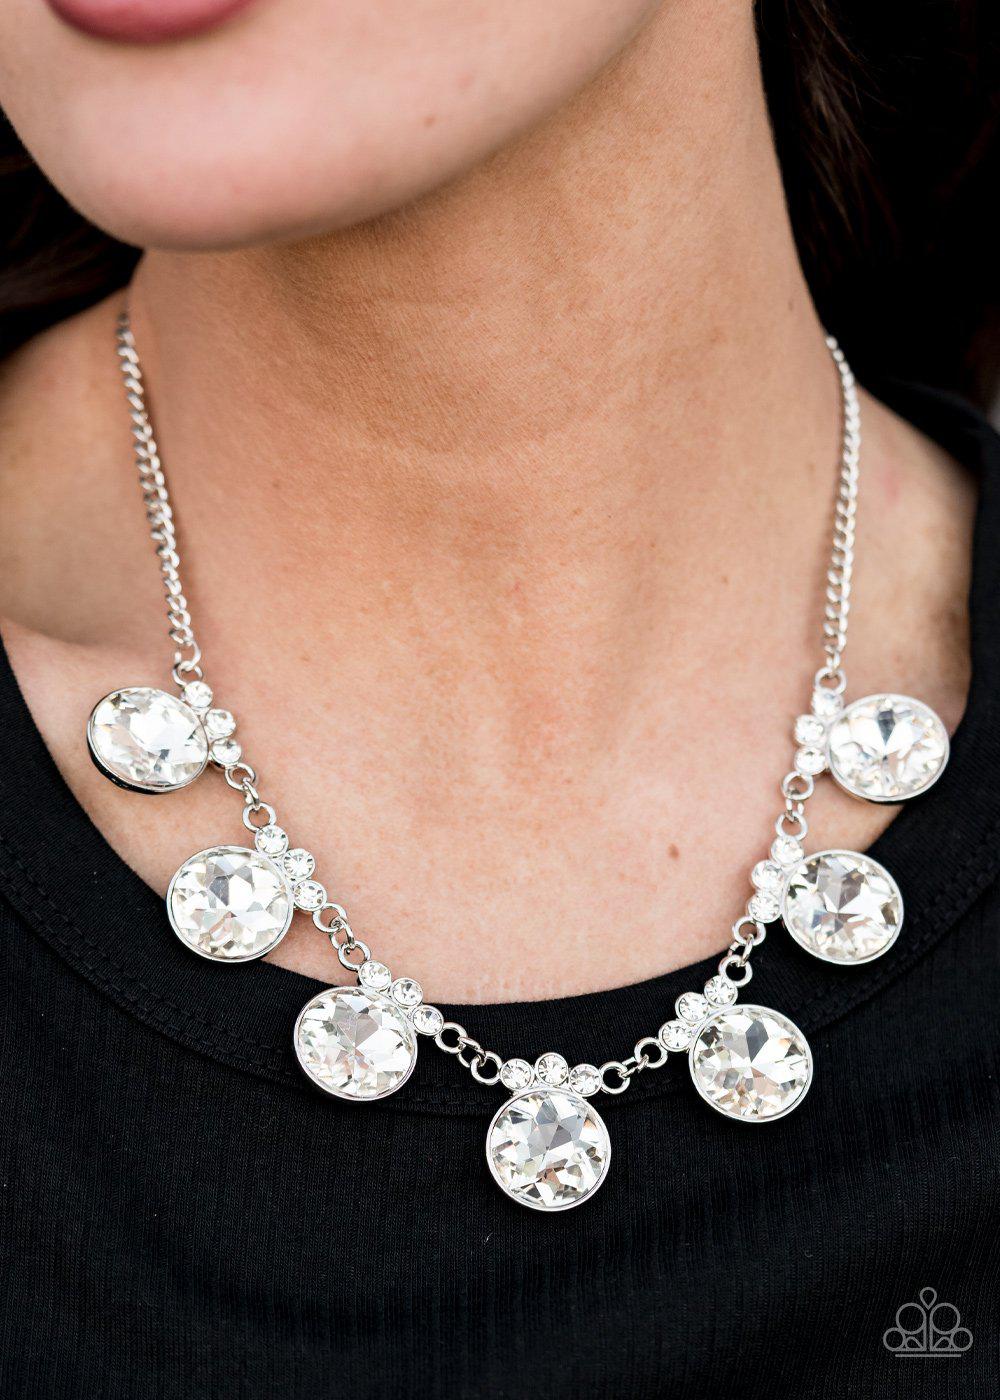 GLOW-Getter Glamour White Rhinestone Necklace - Paparazzi Accessories Convention Exclusive-CarasShop.com - $5 Jewelry by Cara Jewels